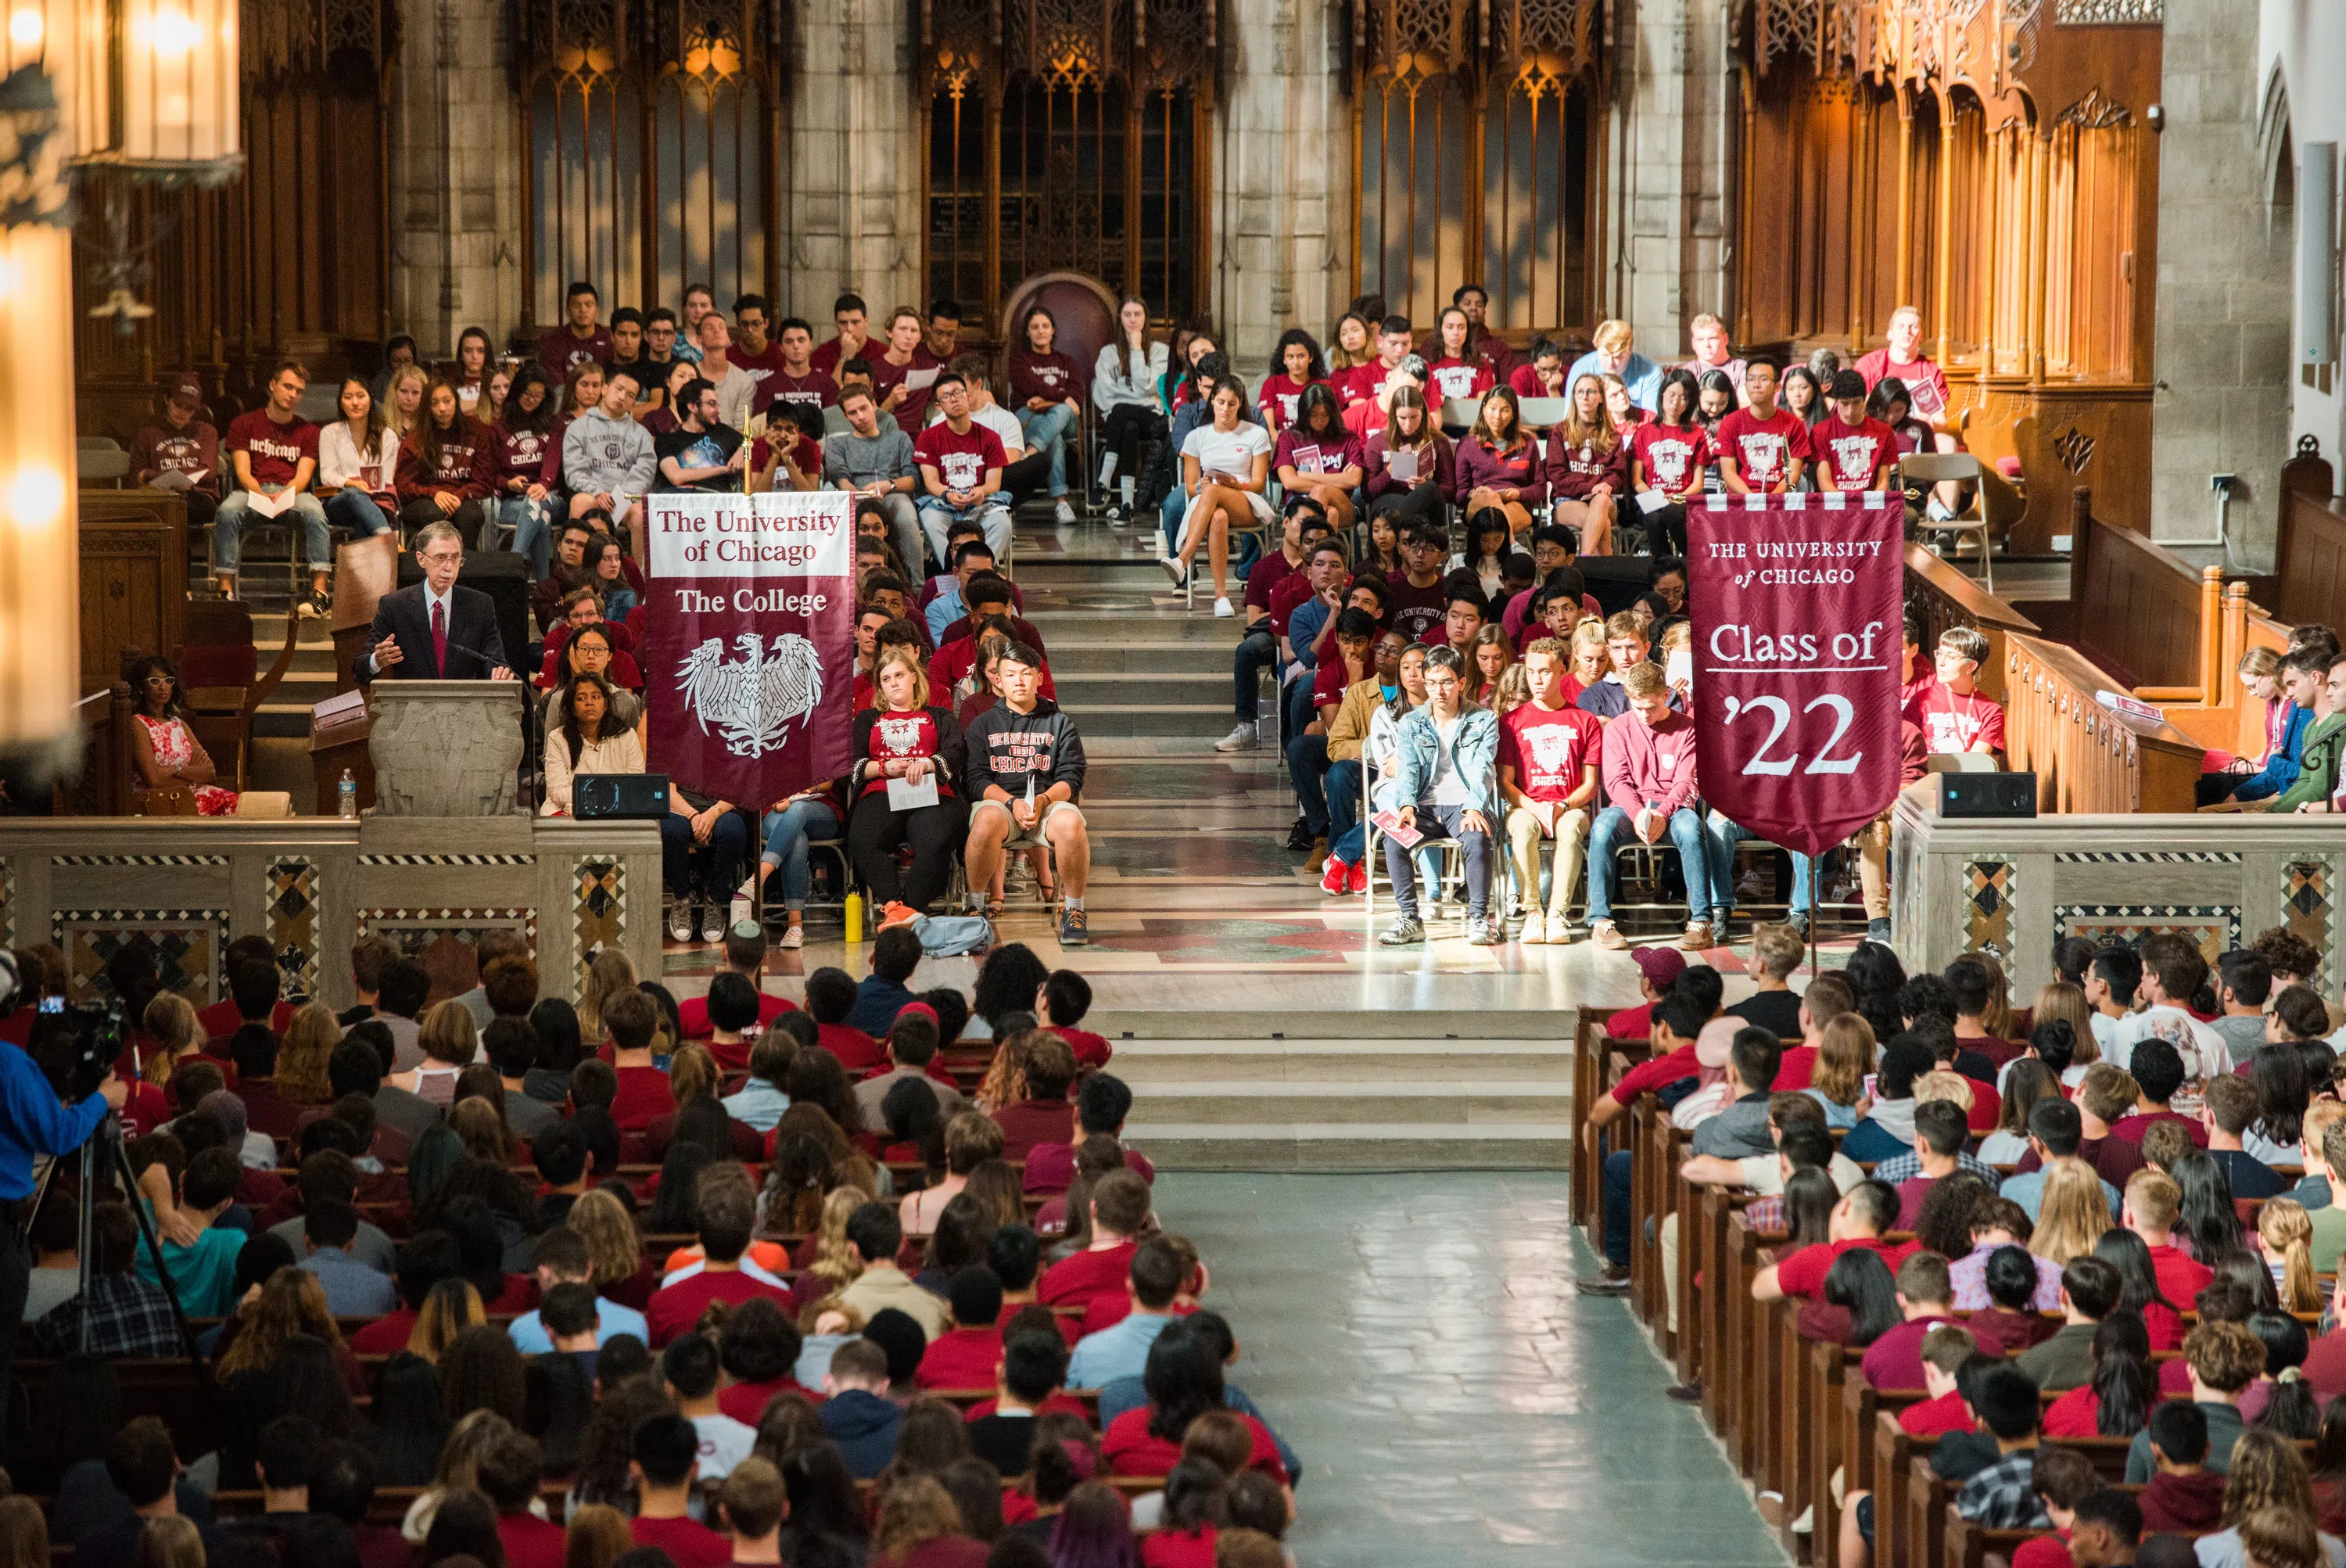 Rockefeller interior, crowded with students for Convocation